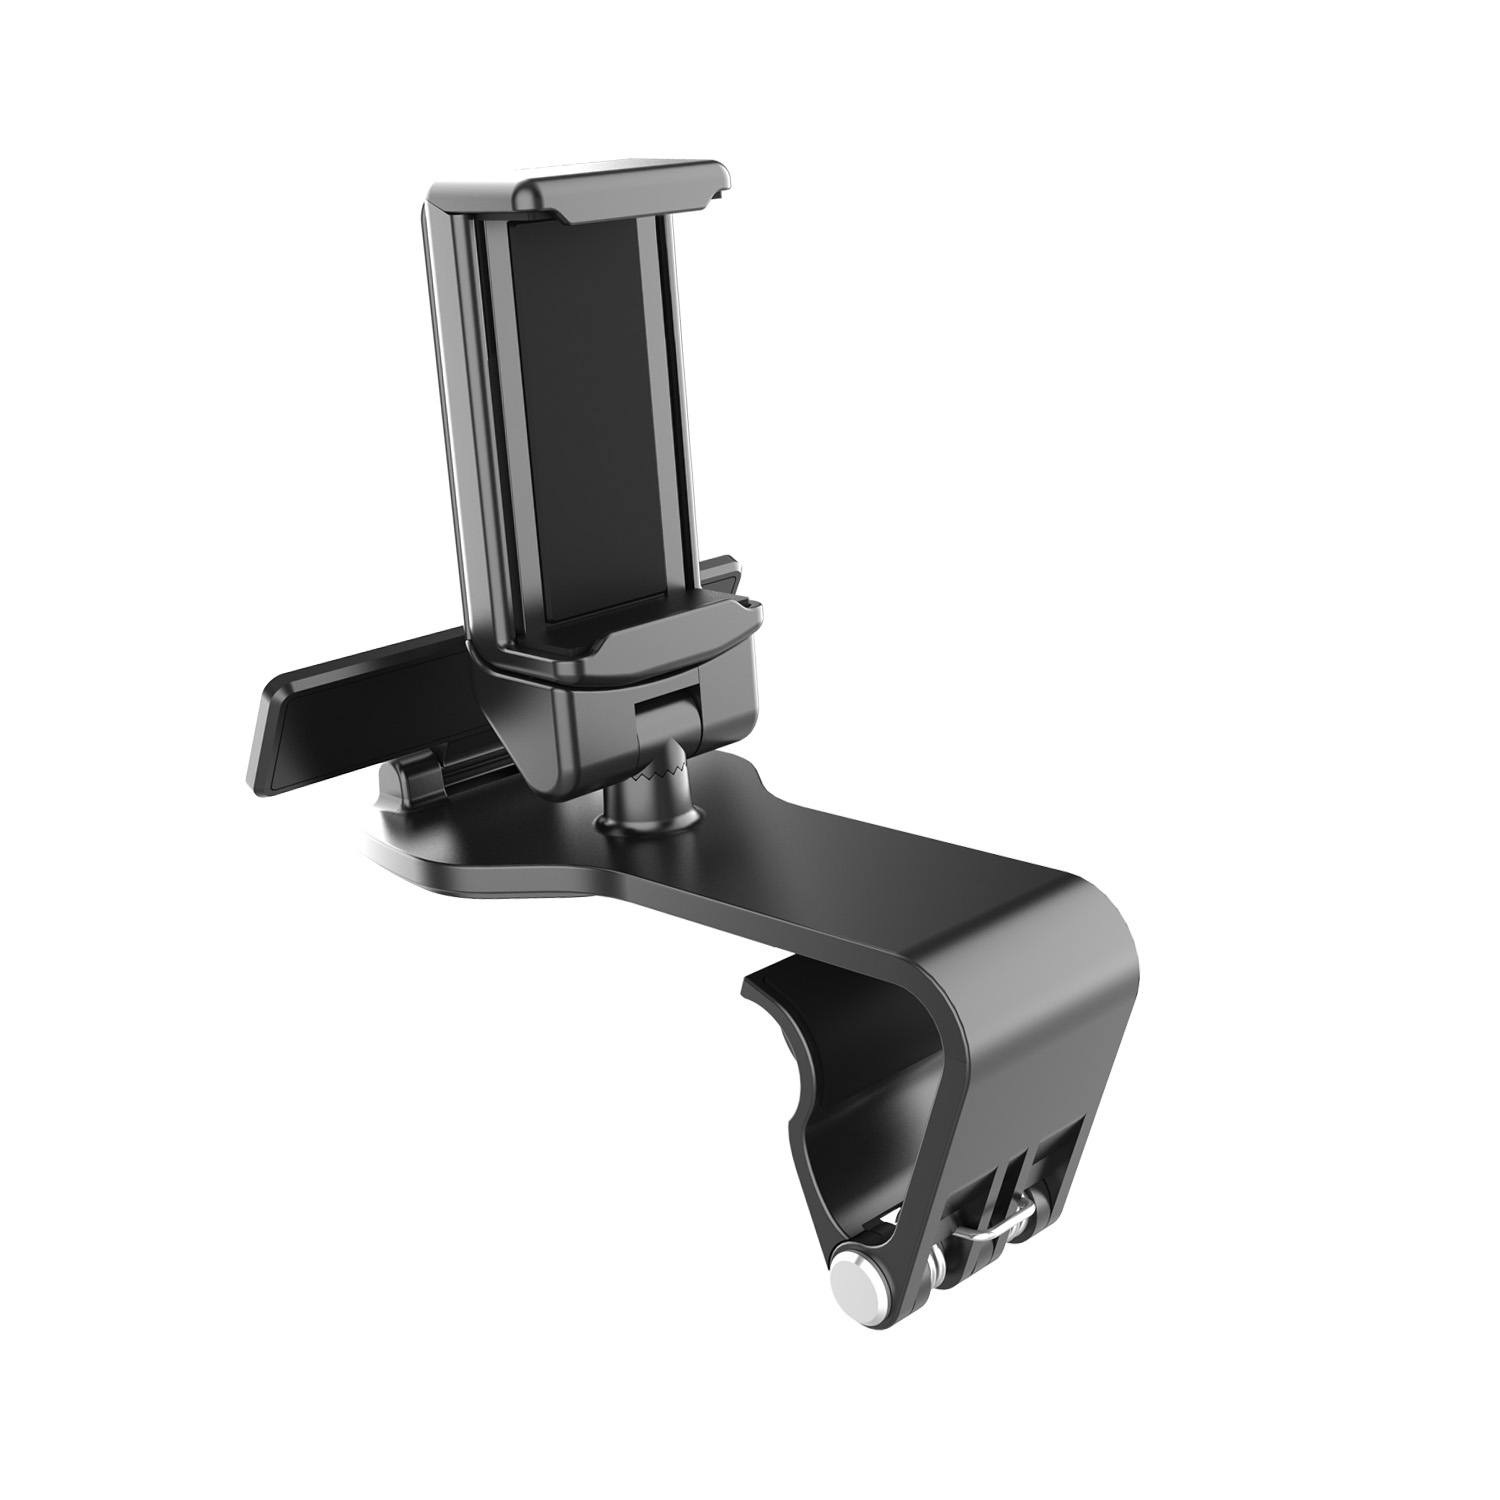 Mobile Phone Holder, Universal Bracket With Luminous Parking Number For Center Console Sun Visor 360 Degree Rotation Quick Disassembly Design black